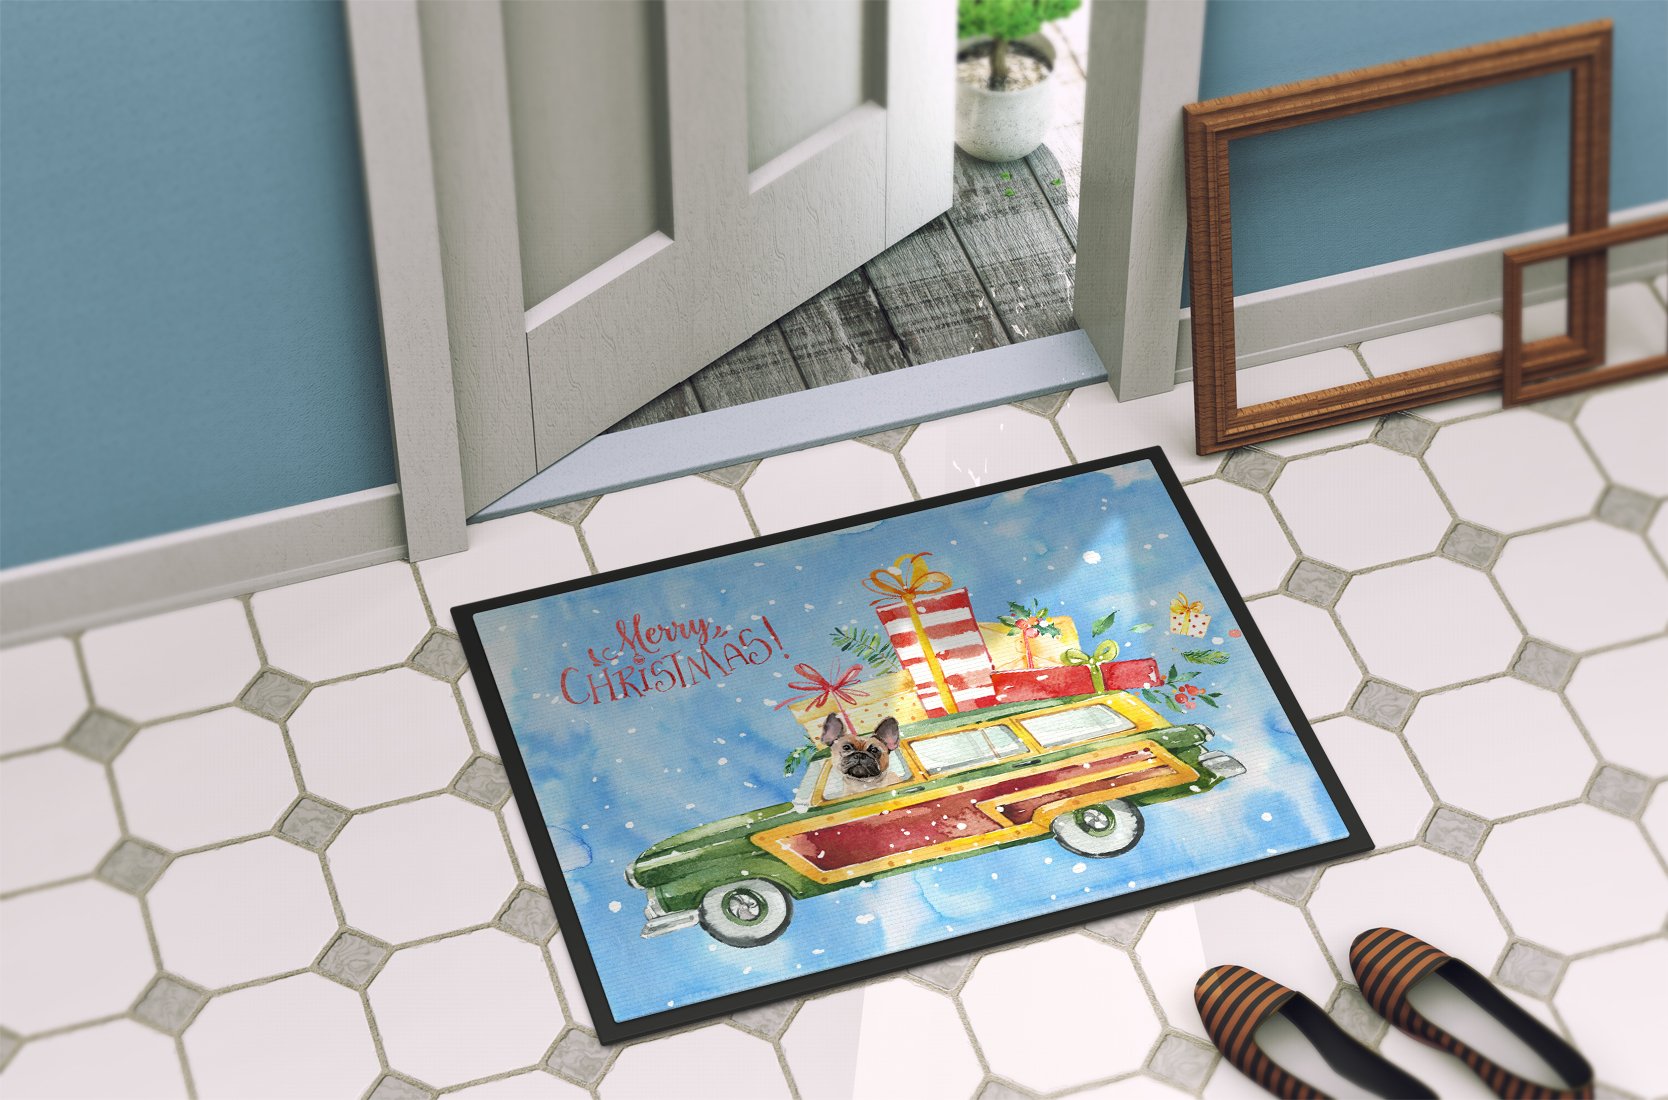 Merry Christmas Fawn French Bulldog Indoor or Outdoor Mat 24x36 CK2454JMAT by Caroline's Treasures